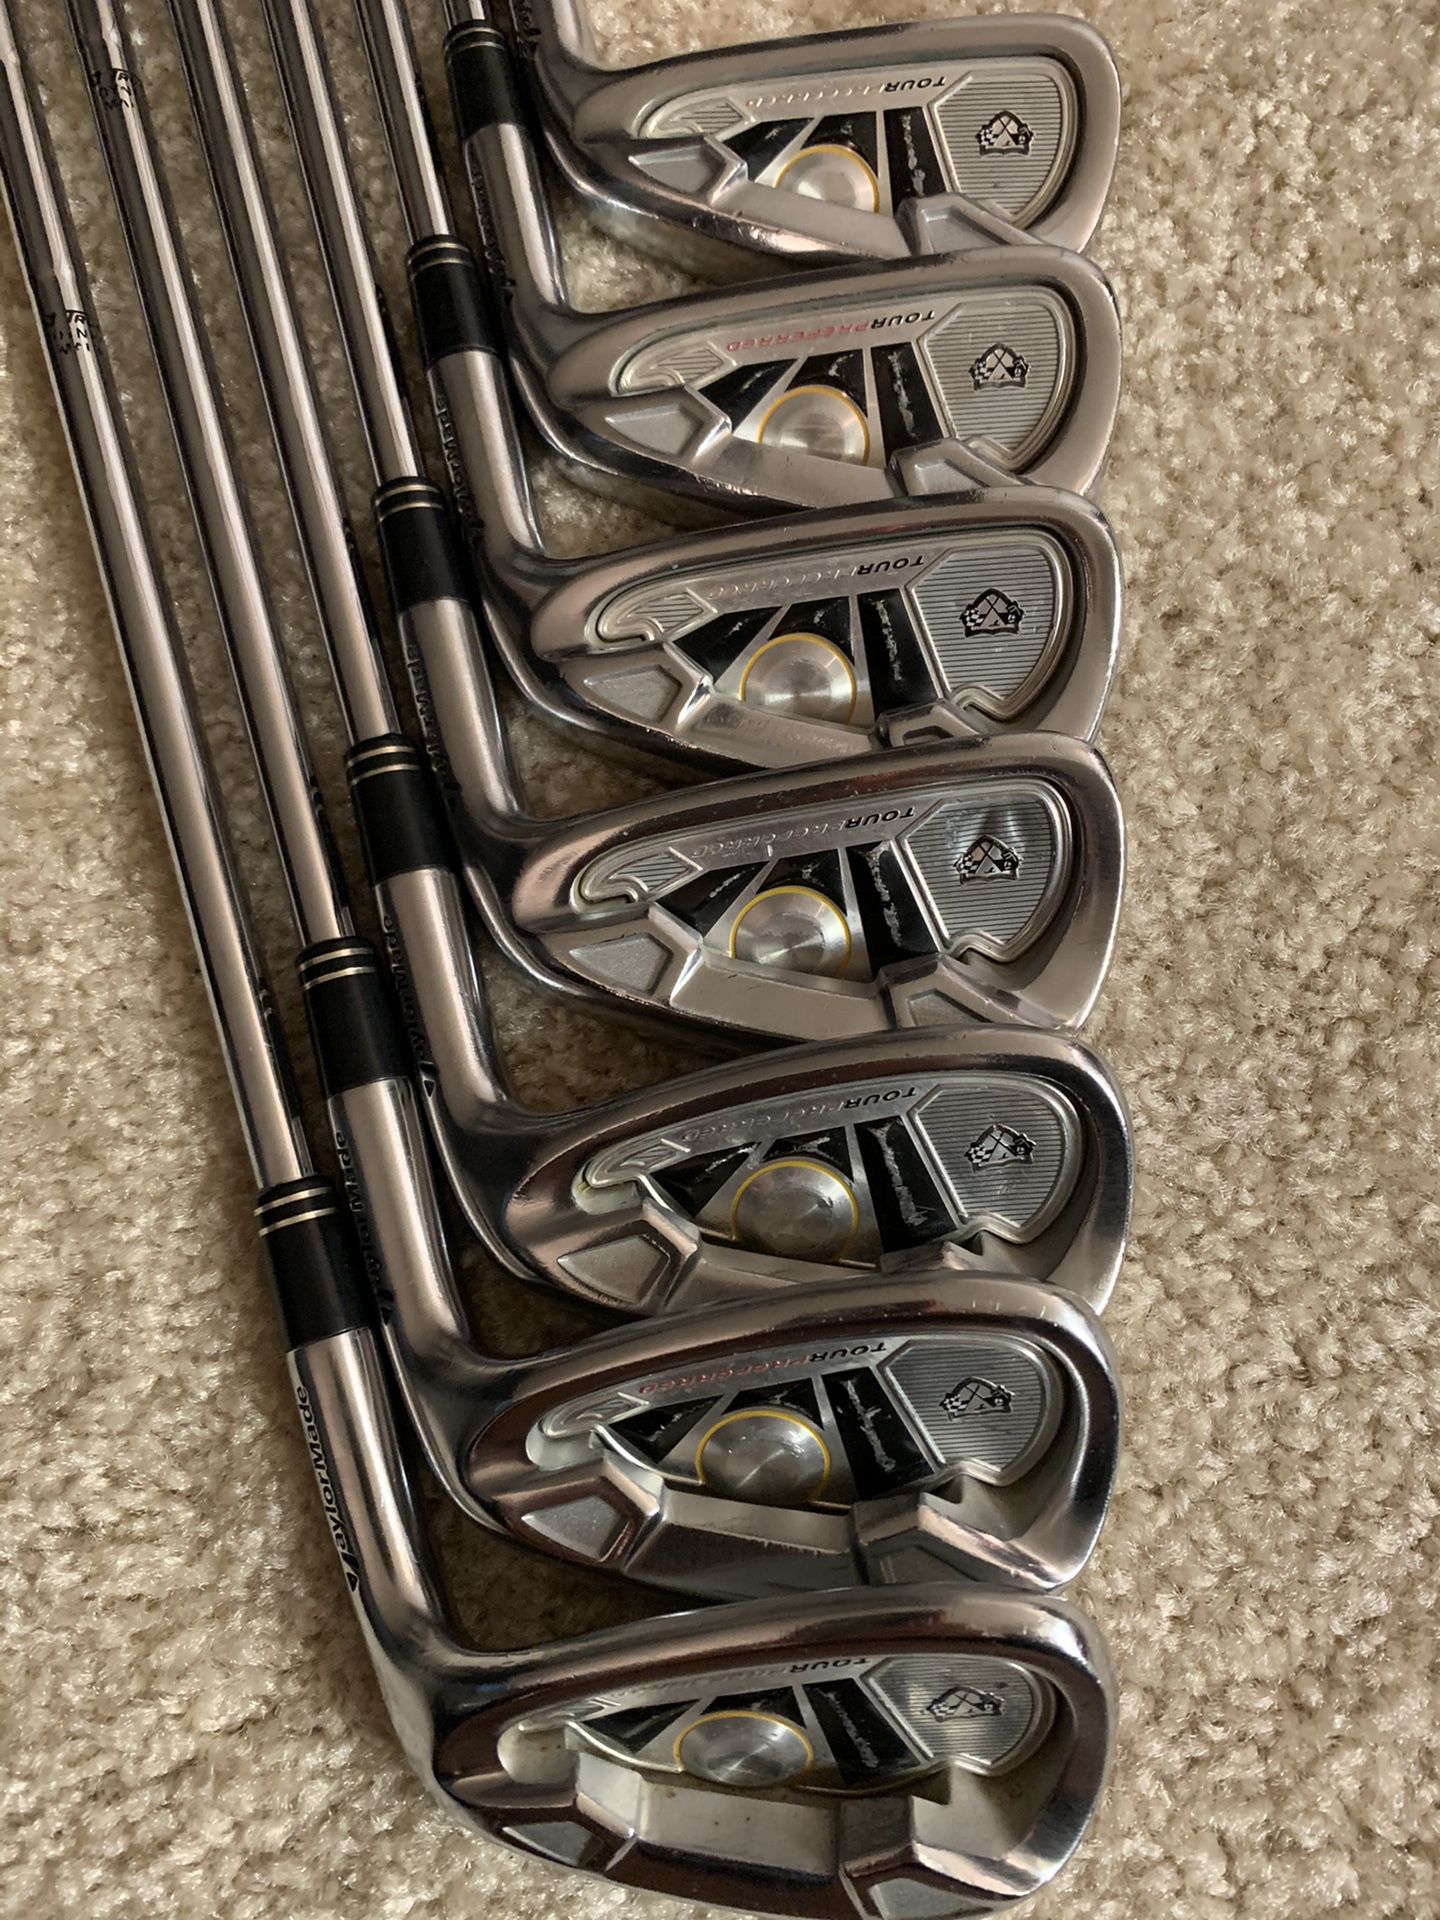 TaylorMade Tour Preferred 4-PW Golf Irons